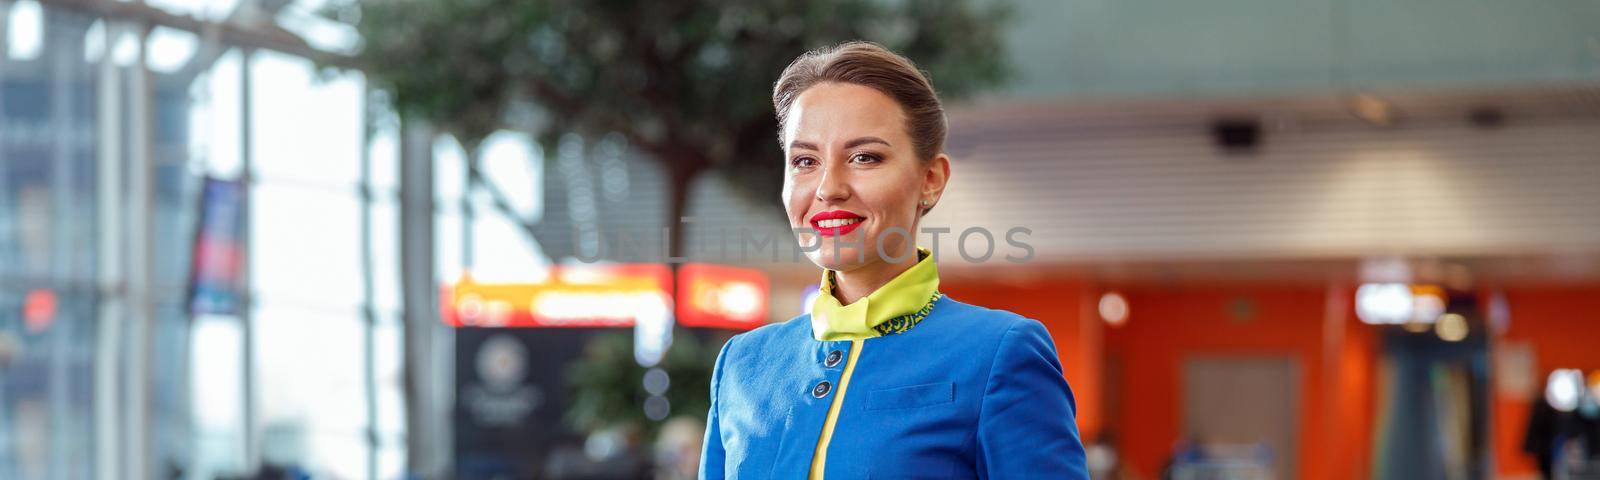 Cheerful female flight attendant in airline air hostess uniform looking at camera and smiling while standing in passenger departure terminal